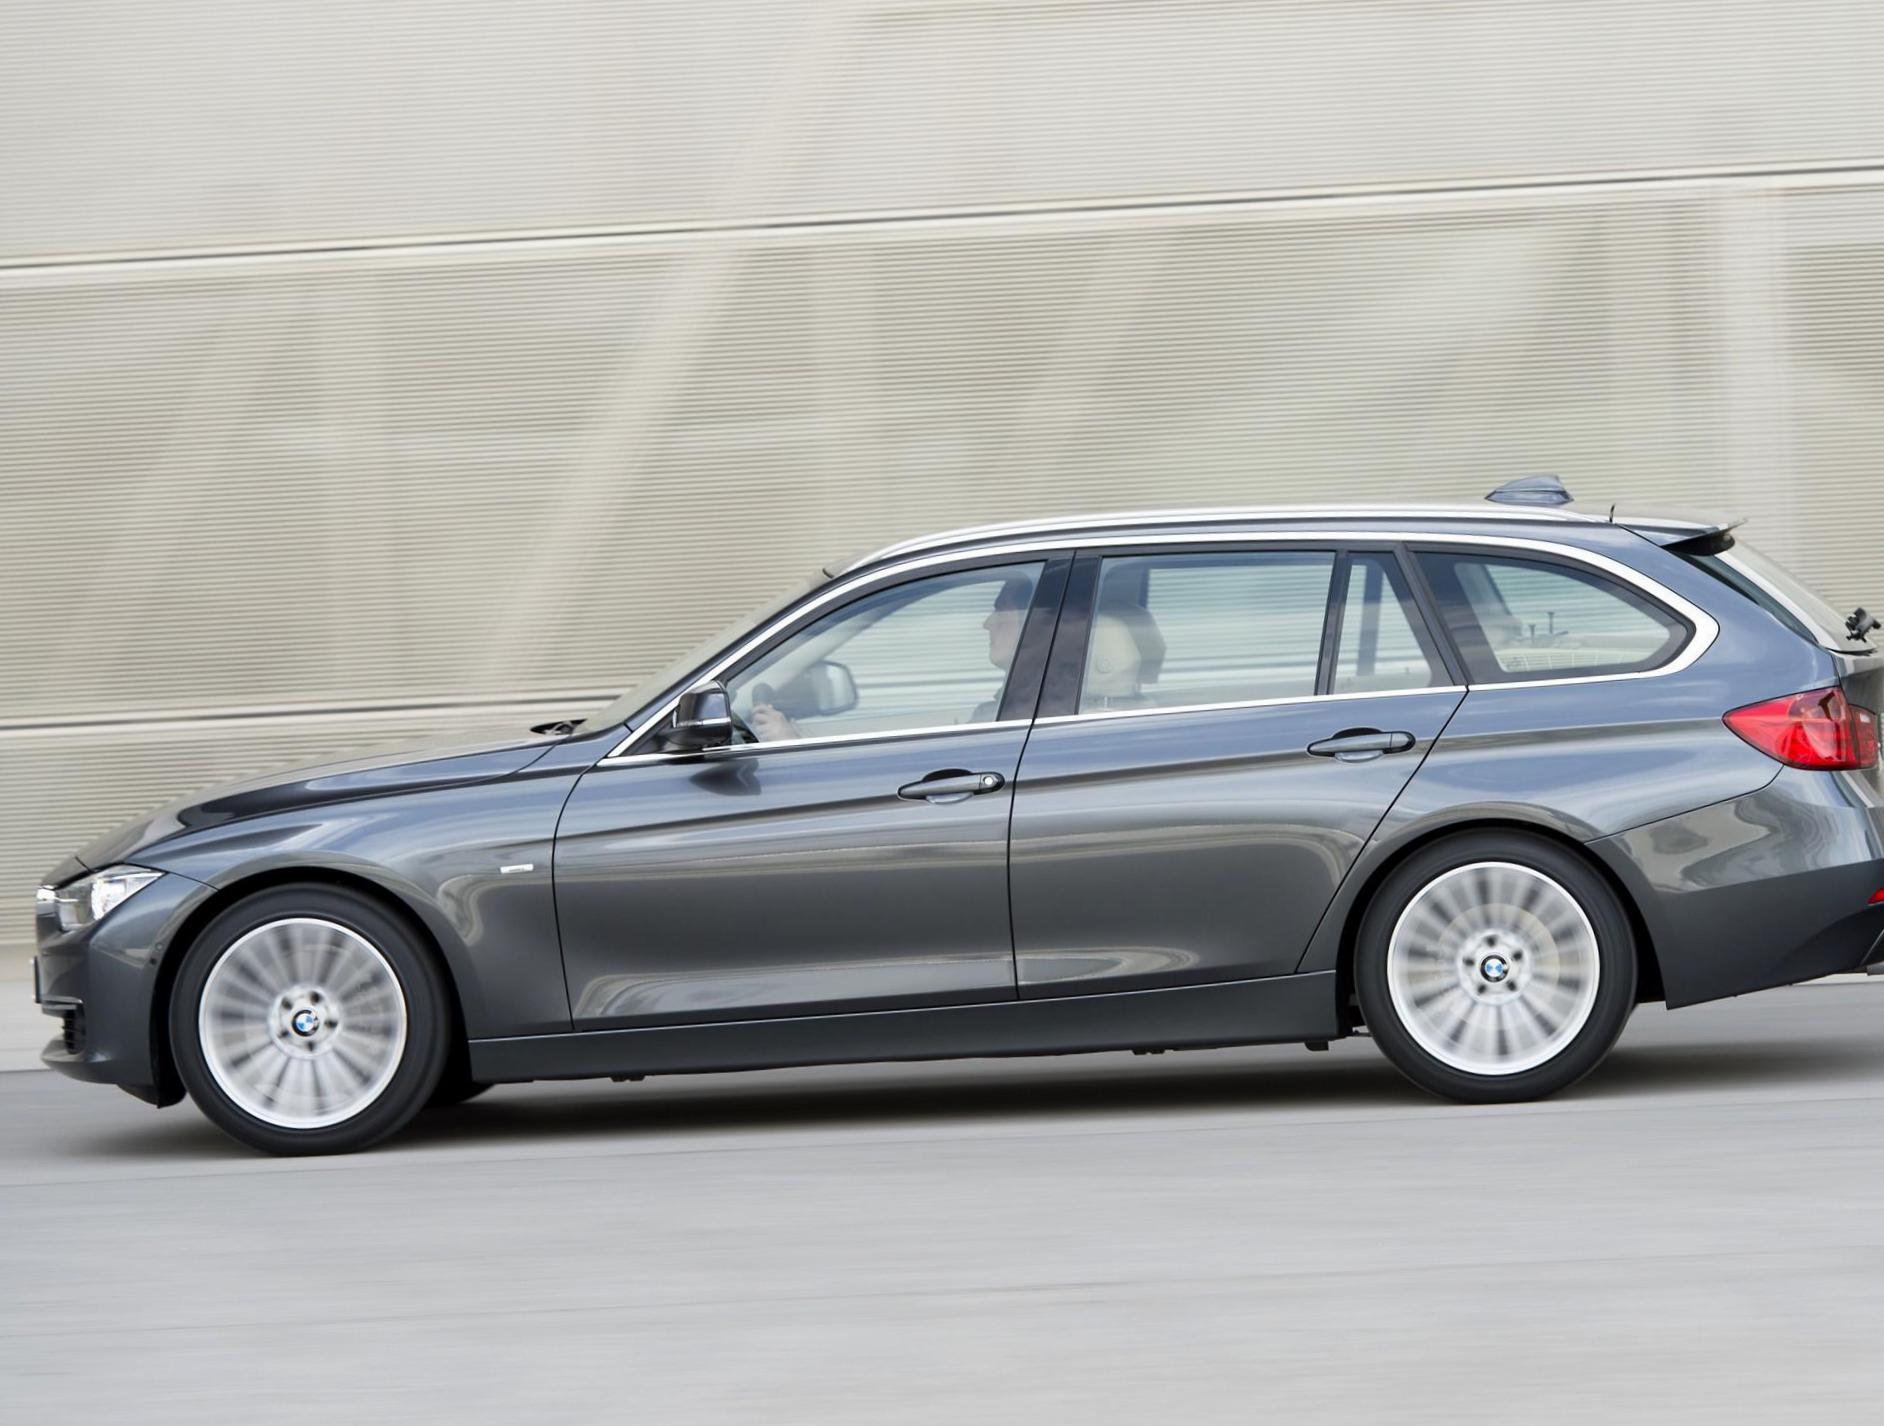 3 Series Touring (F31) BMW review 2012